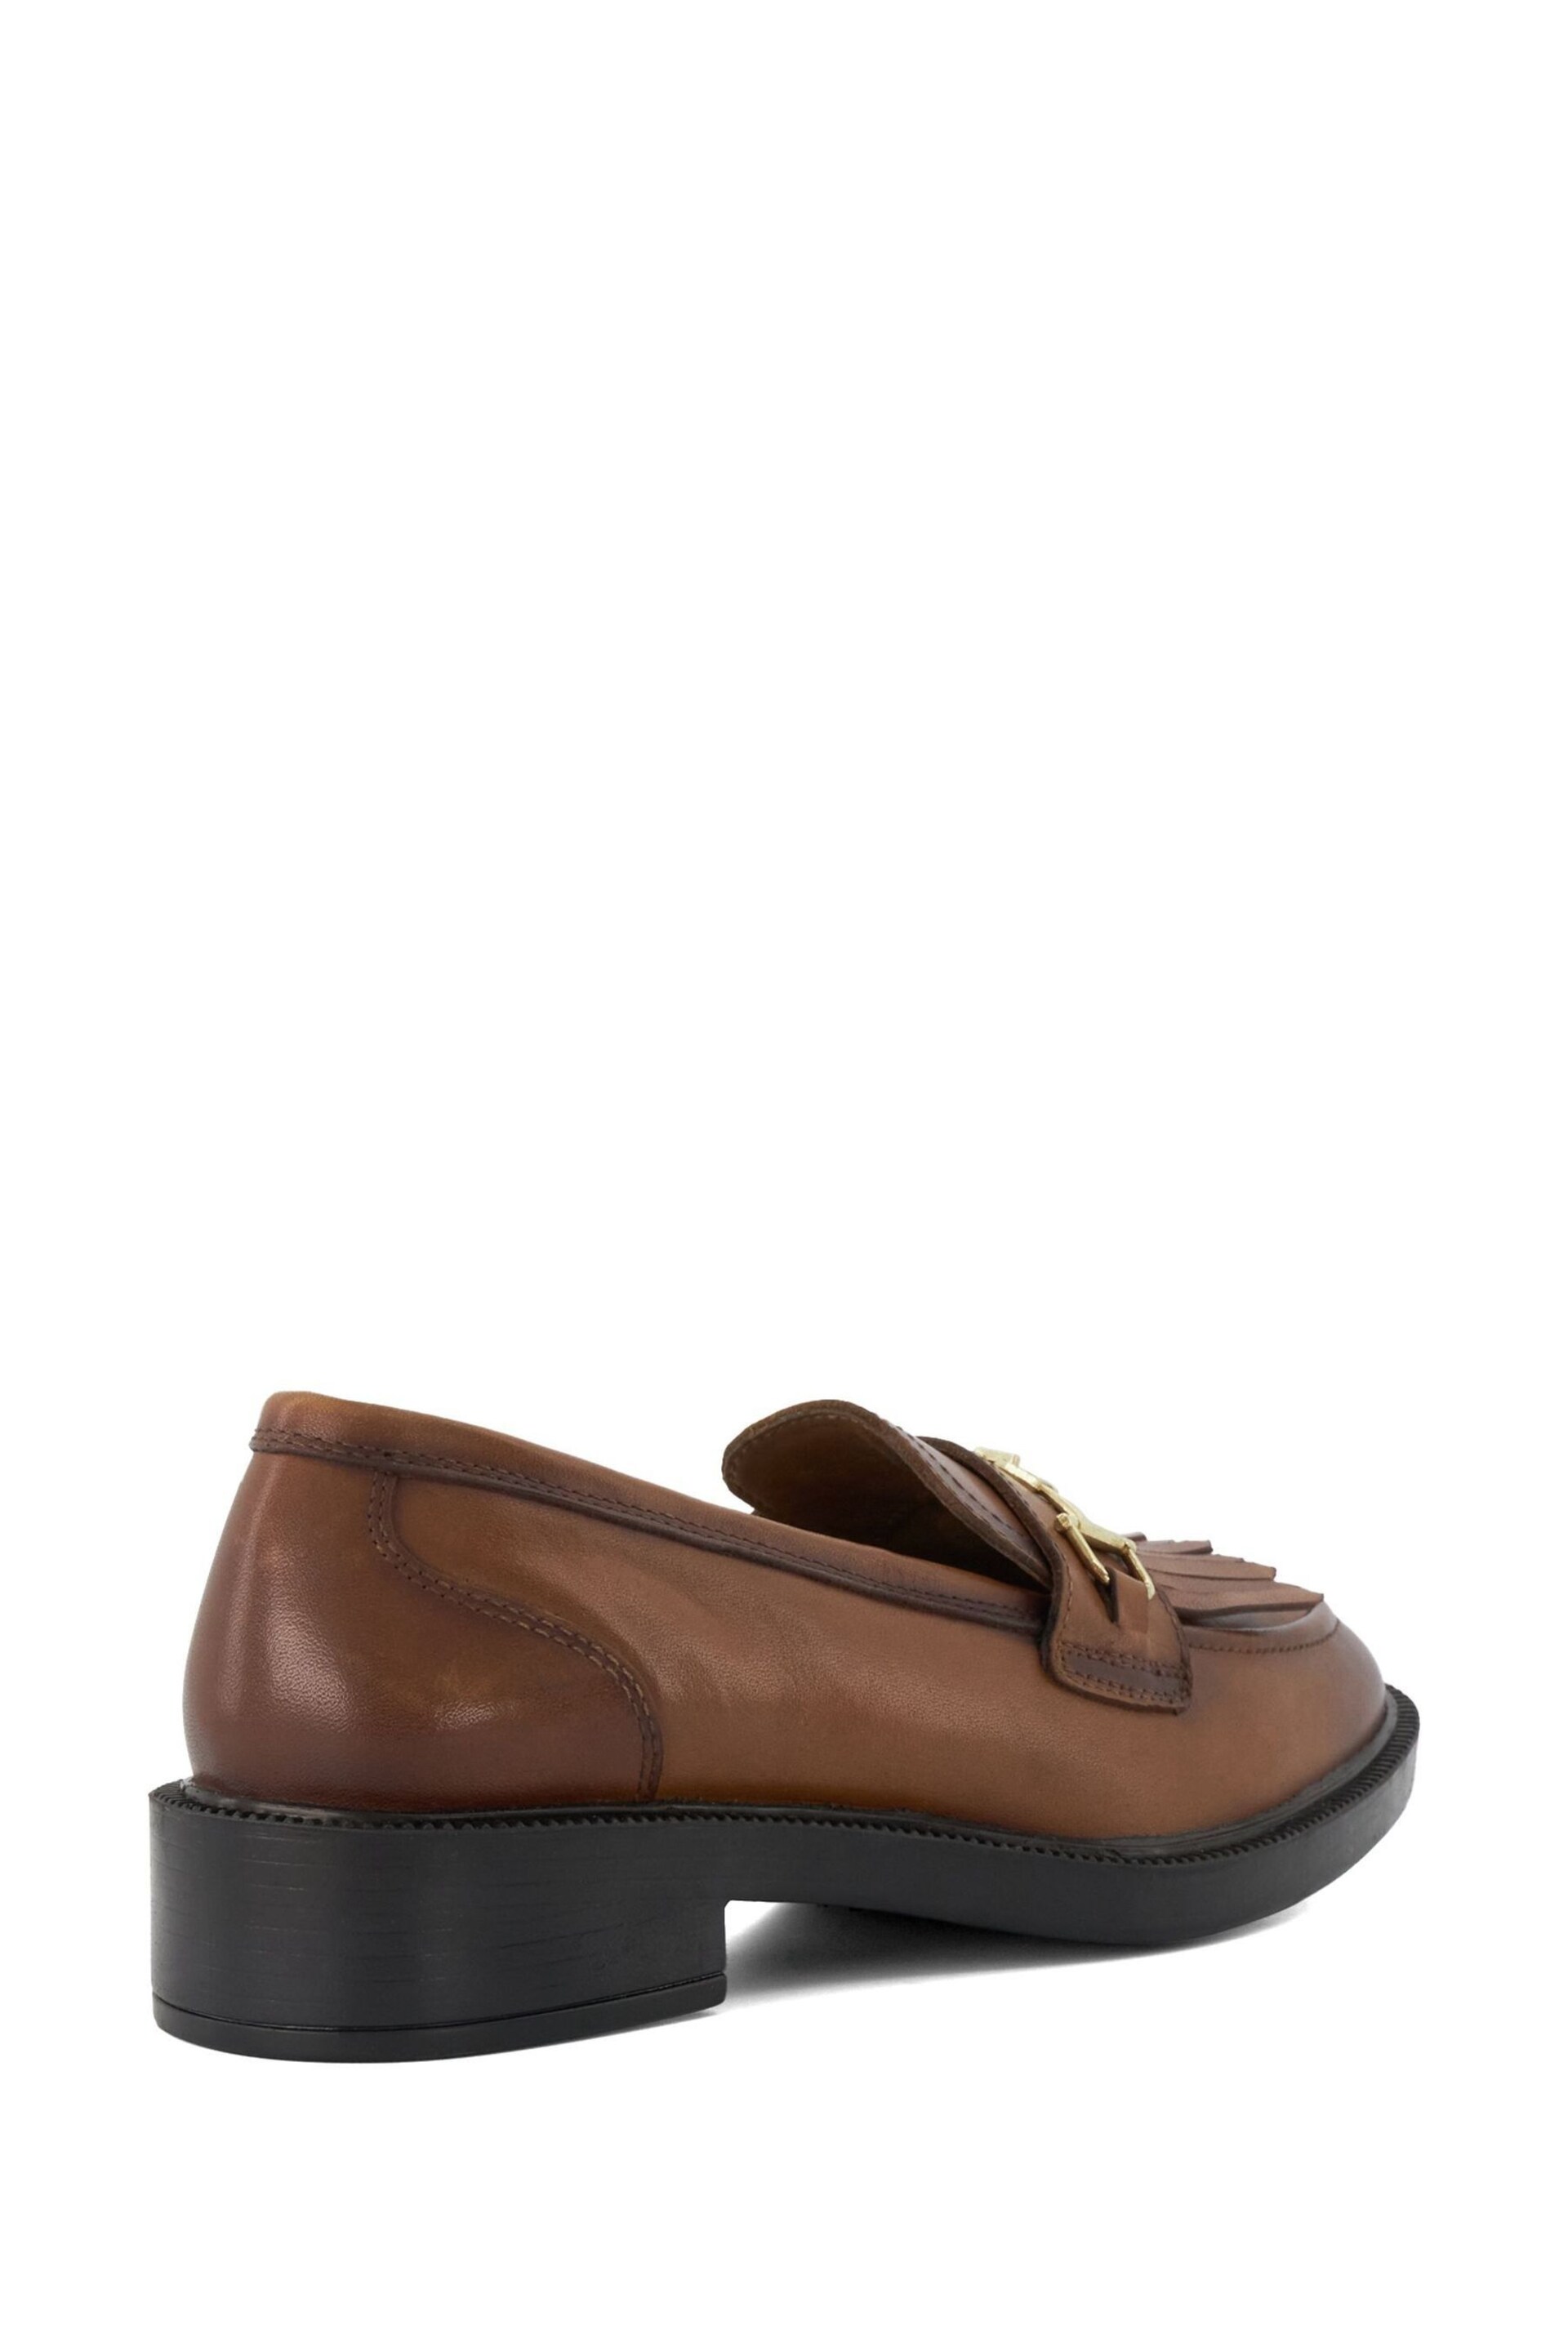 Dune London Brown Guided DD Snaffle Fringe Loafers - Image 4 of 7